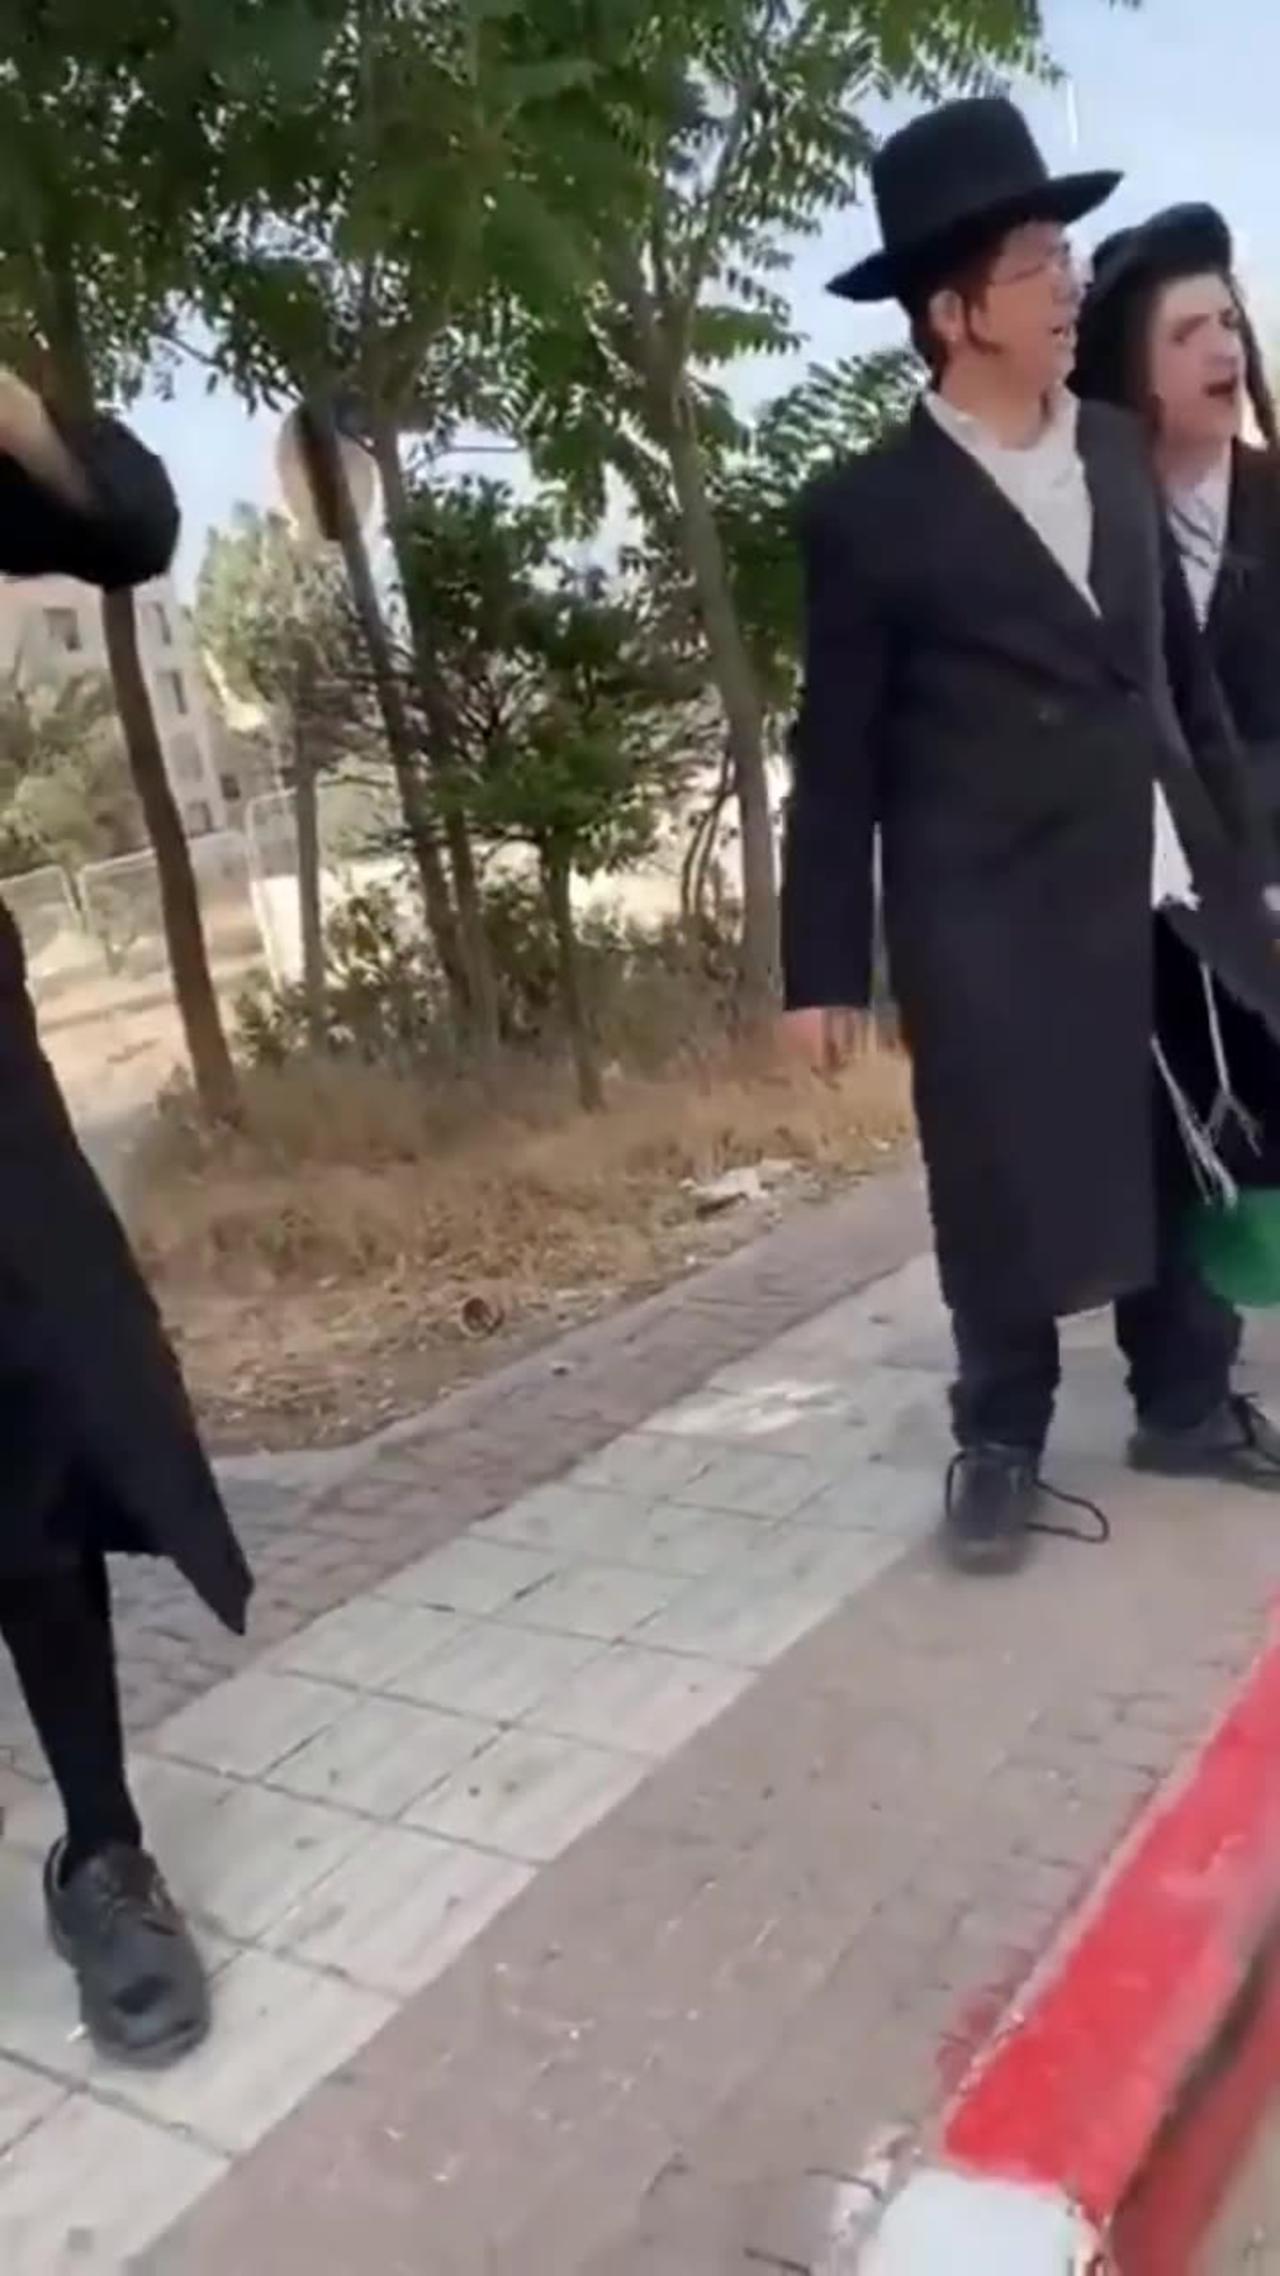 Anti-Zionist Jews marched in Sheikh Jarrah with Palestinian flags. We are Jews, not Zionists.